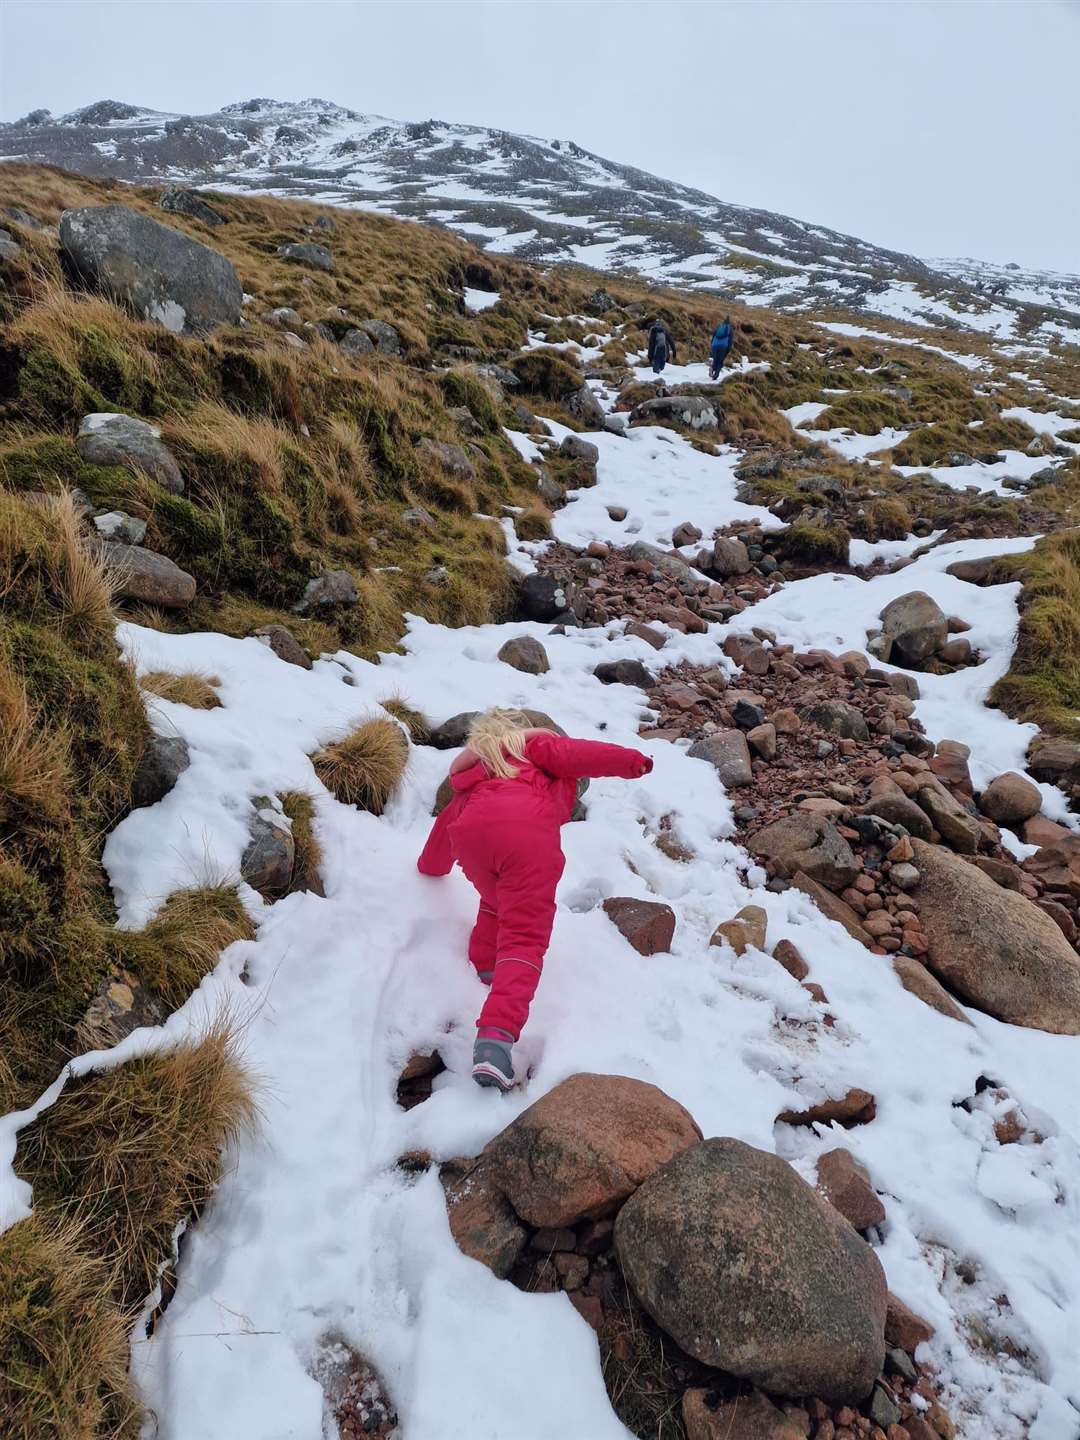 Undeterred by snow, Seren climbed up all three mountains in a bid to raise money for Birmingham Children’s Hospital (Glyn Price/JustGiving)